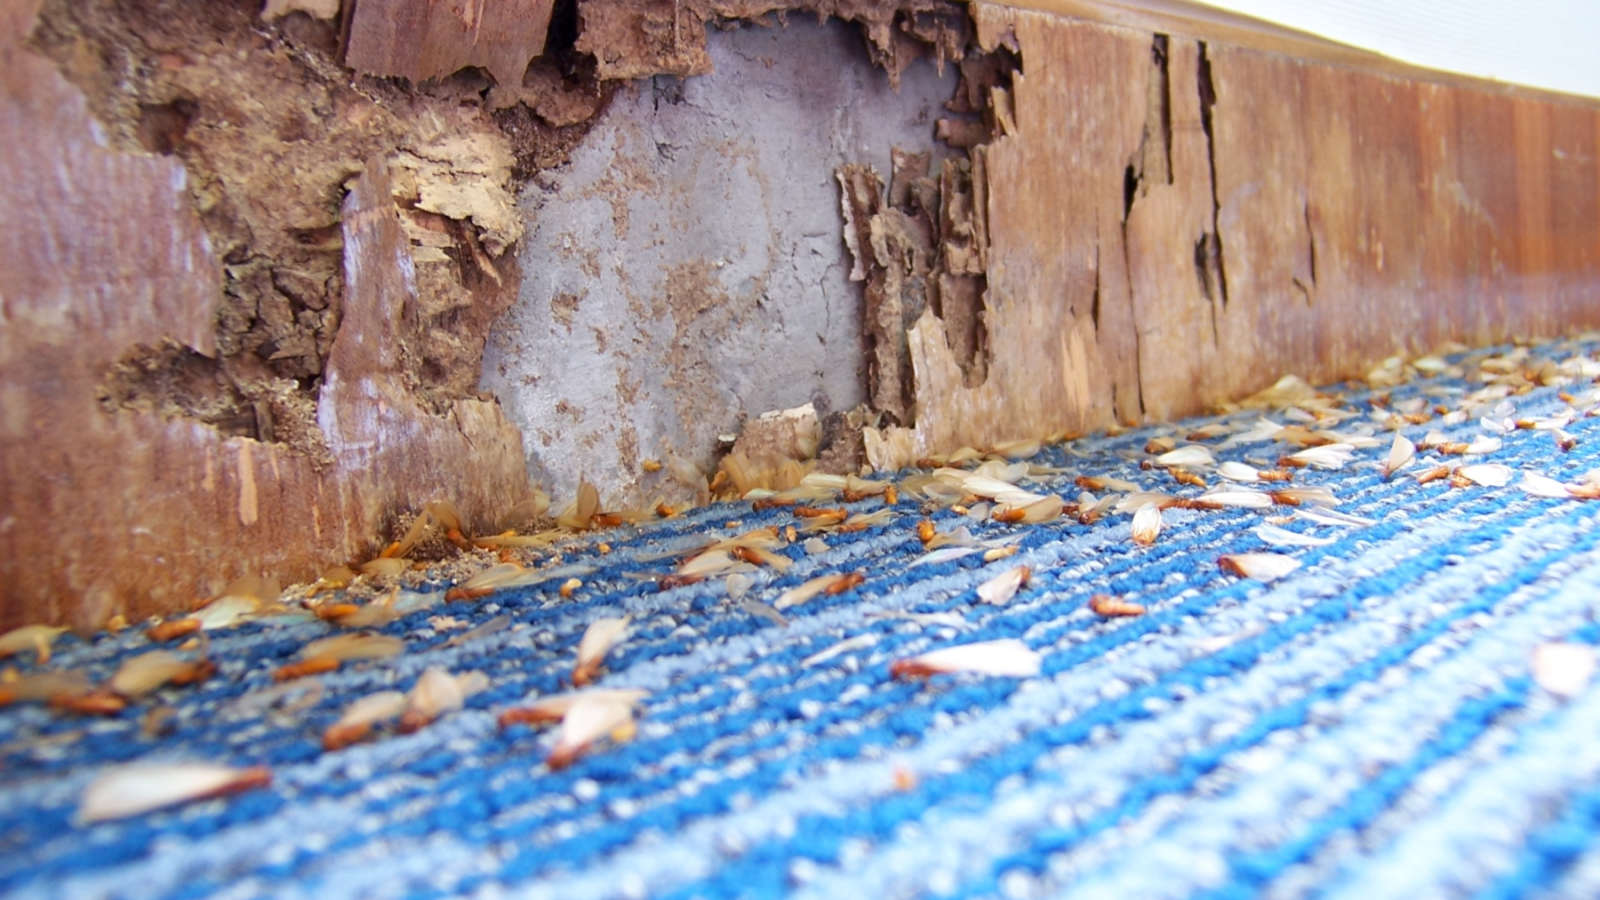 every homeowner should know what a swarm of termites is